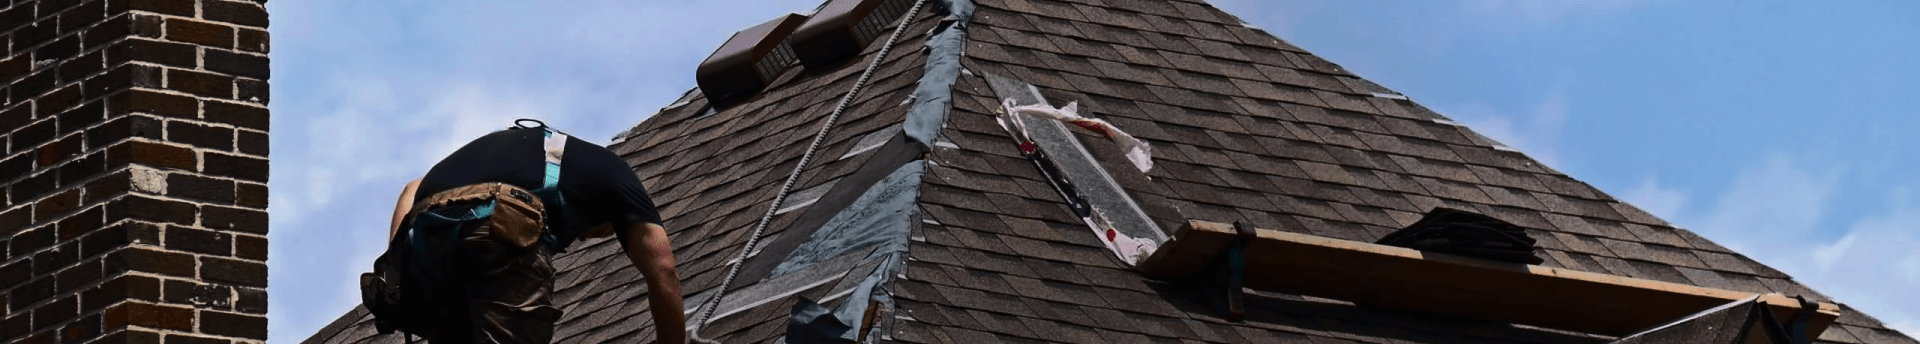 Residential Roof Repair Services - Knoxville Roofers